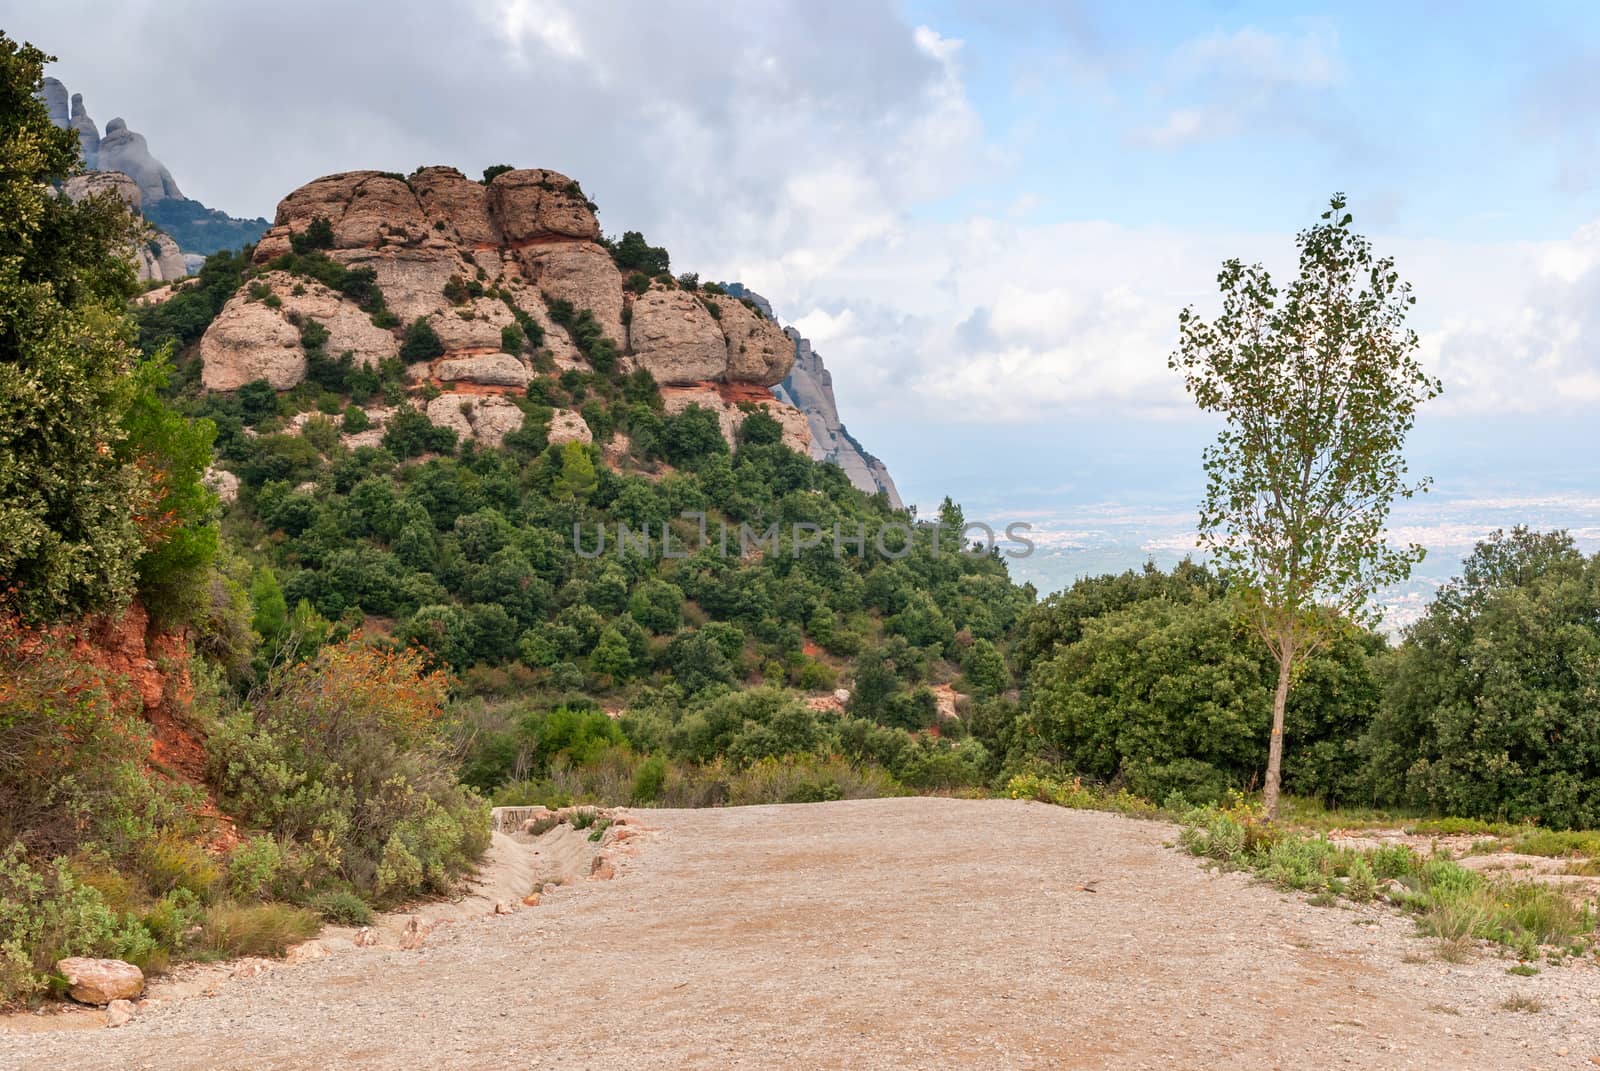 Views from Montserrat mountain, close to Barcelona, Catalonia, Spain by Zhukow